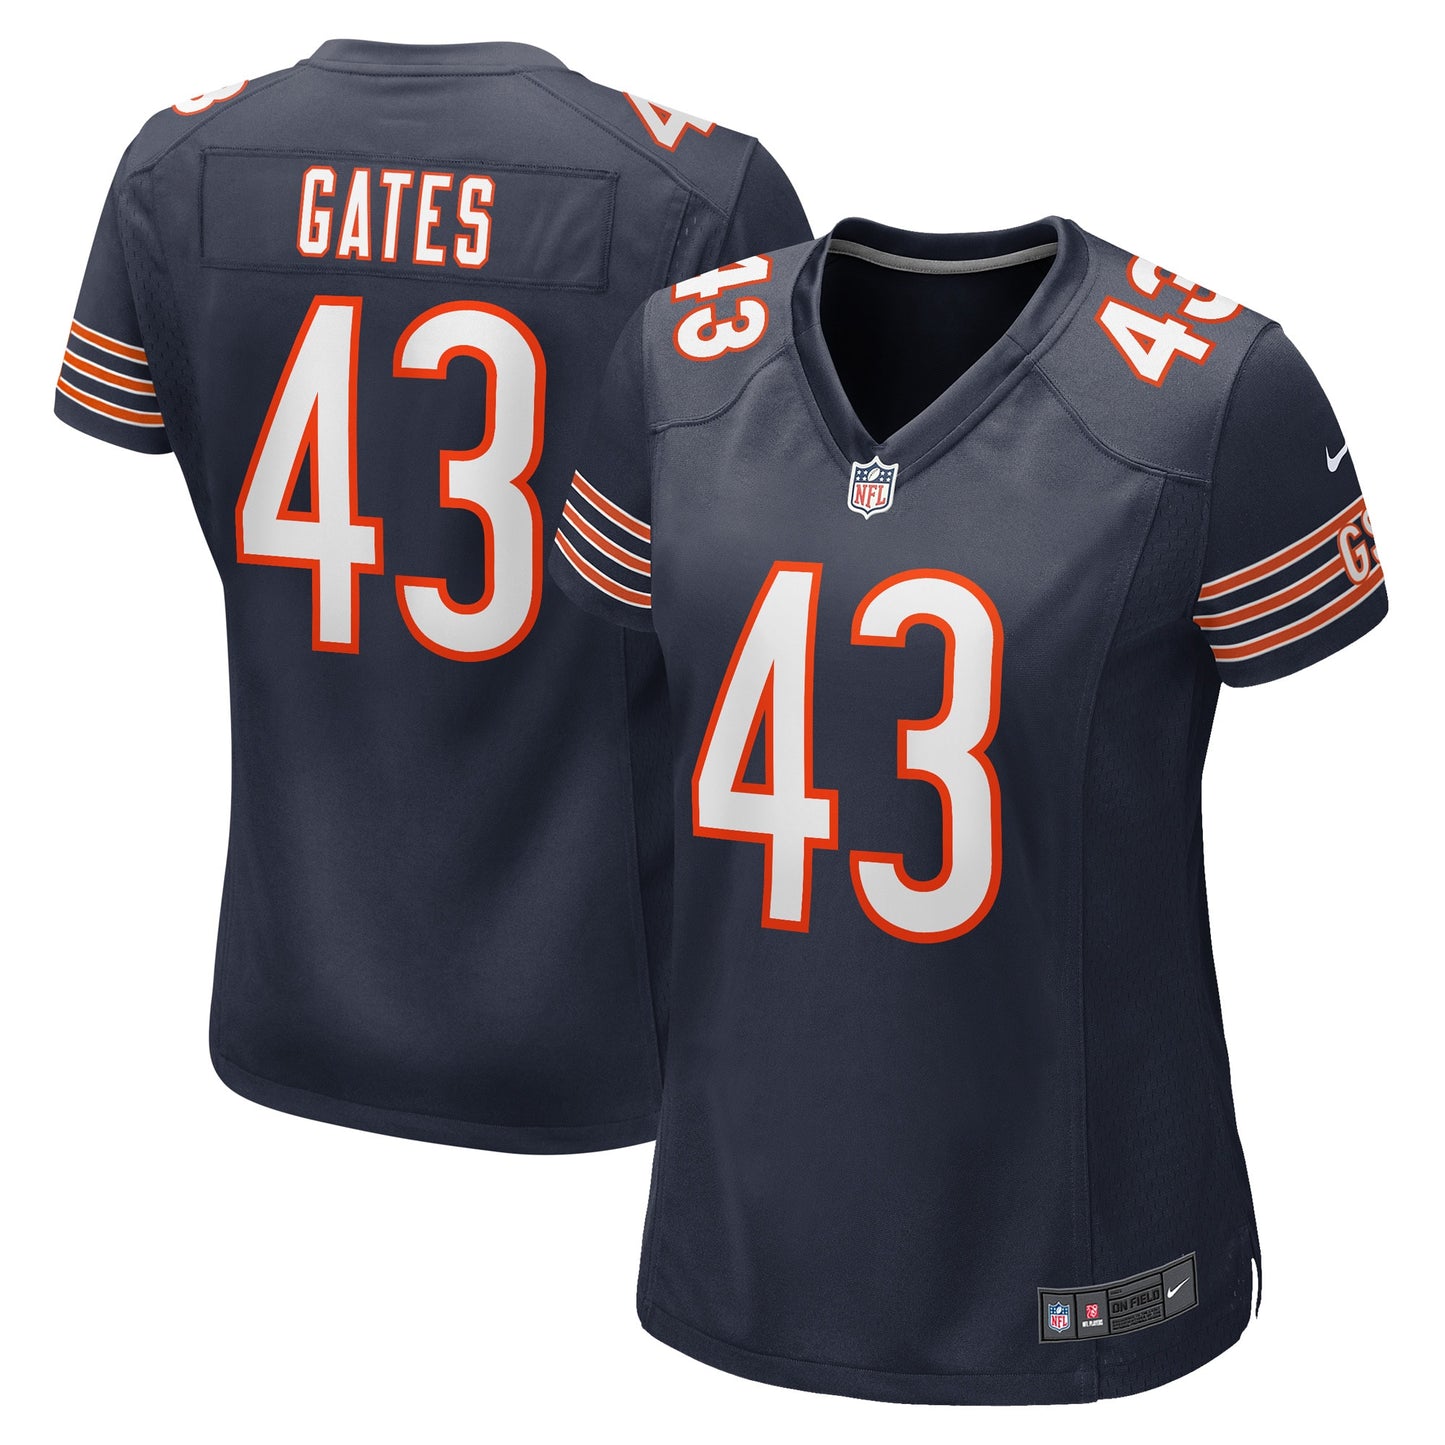 DeMarquis Gates Chicago Bears Nike Women's Game Player Jersey - Navy